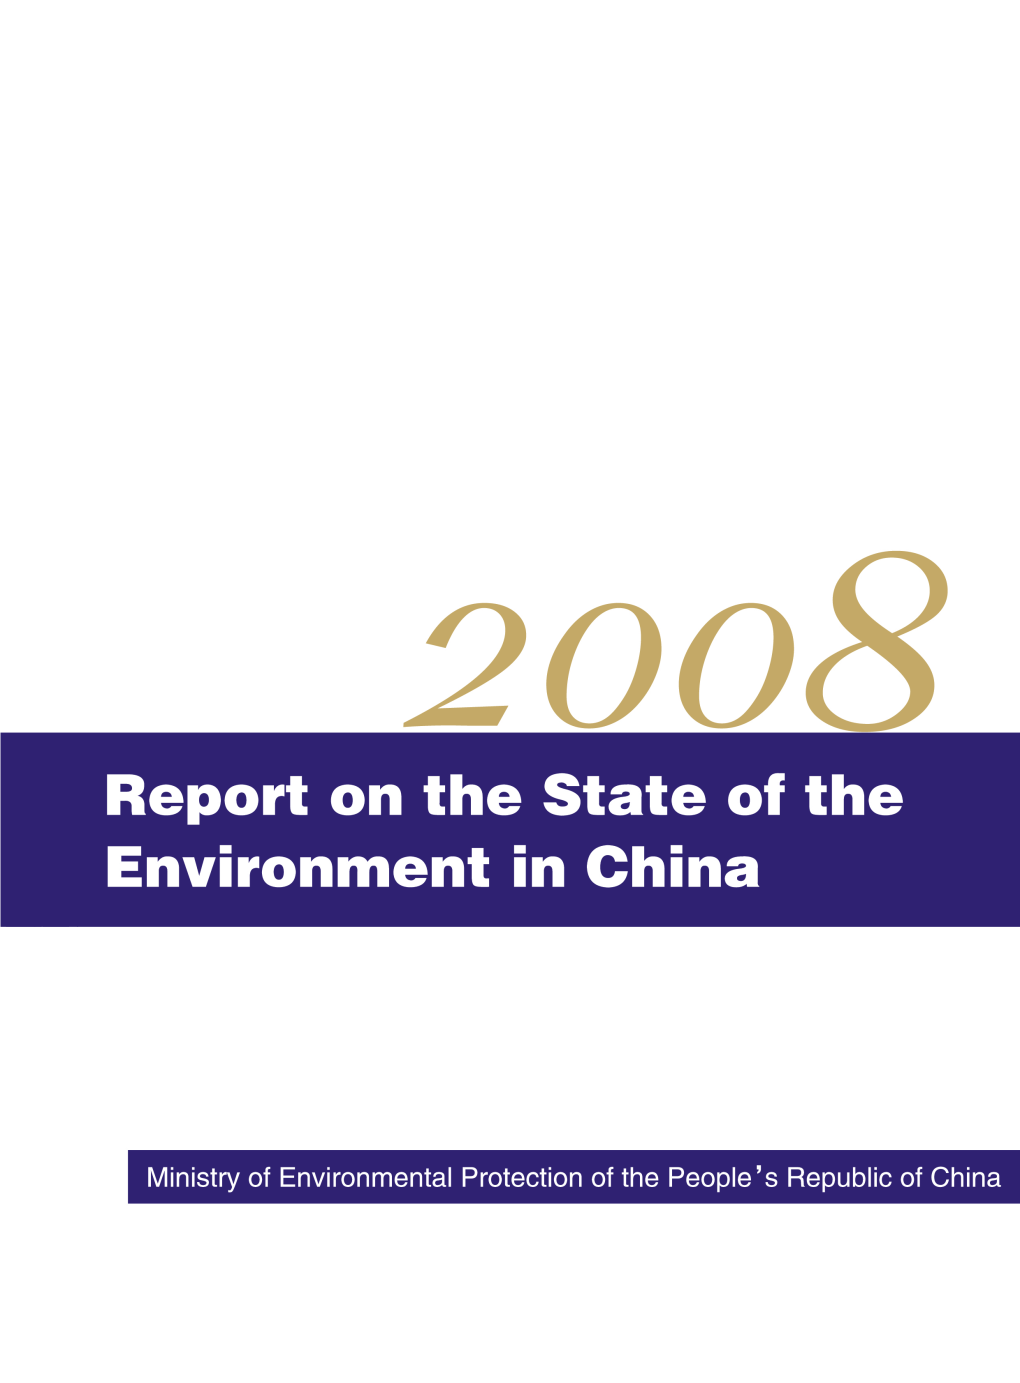 Report on the State of the Emvironment in China 2008